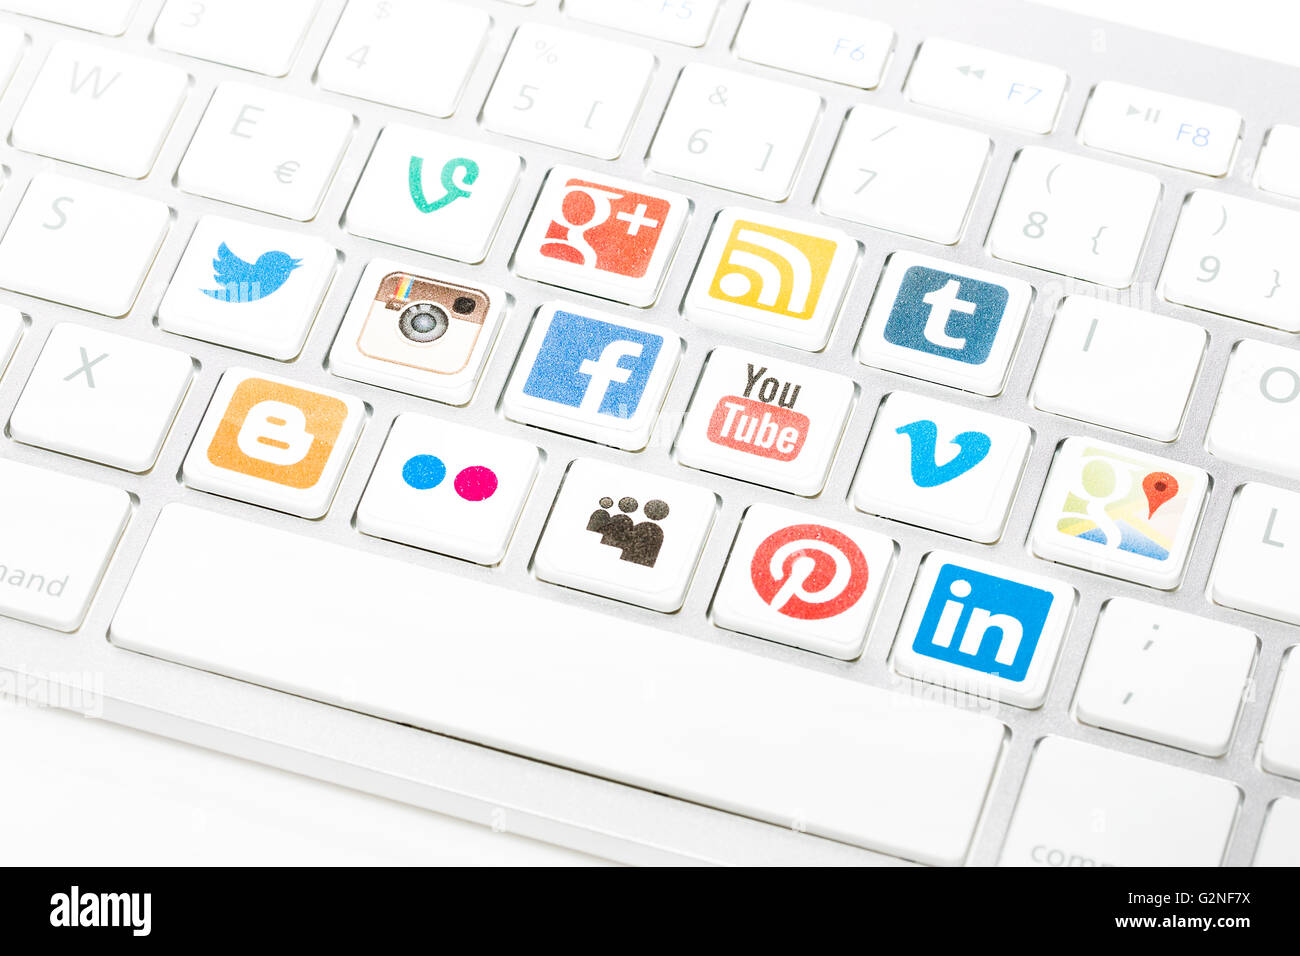 BELCHATOW, POLAND - AUGUST 31, 2014: A social media logotype collection printed and placed on modern computer keyboard. Stock Photo